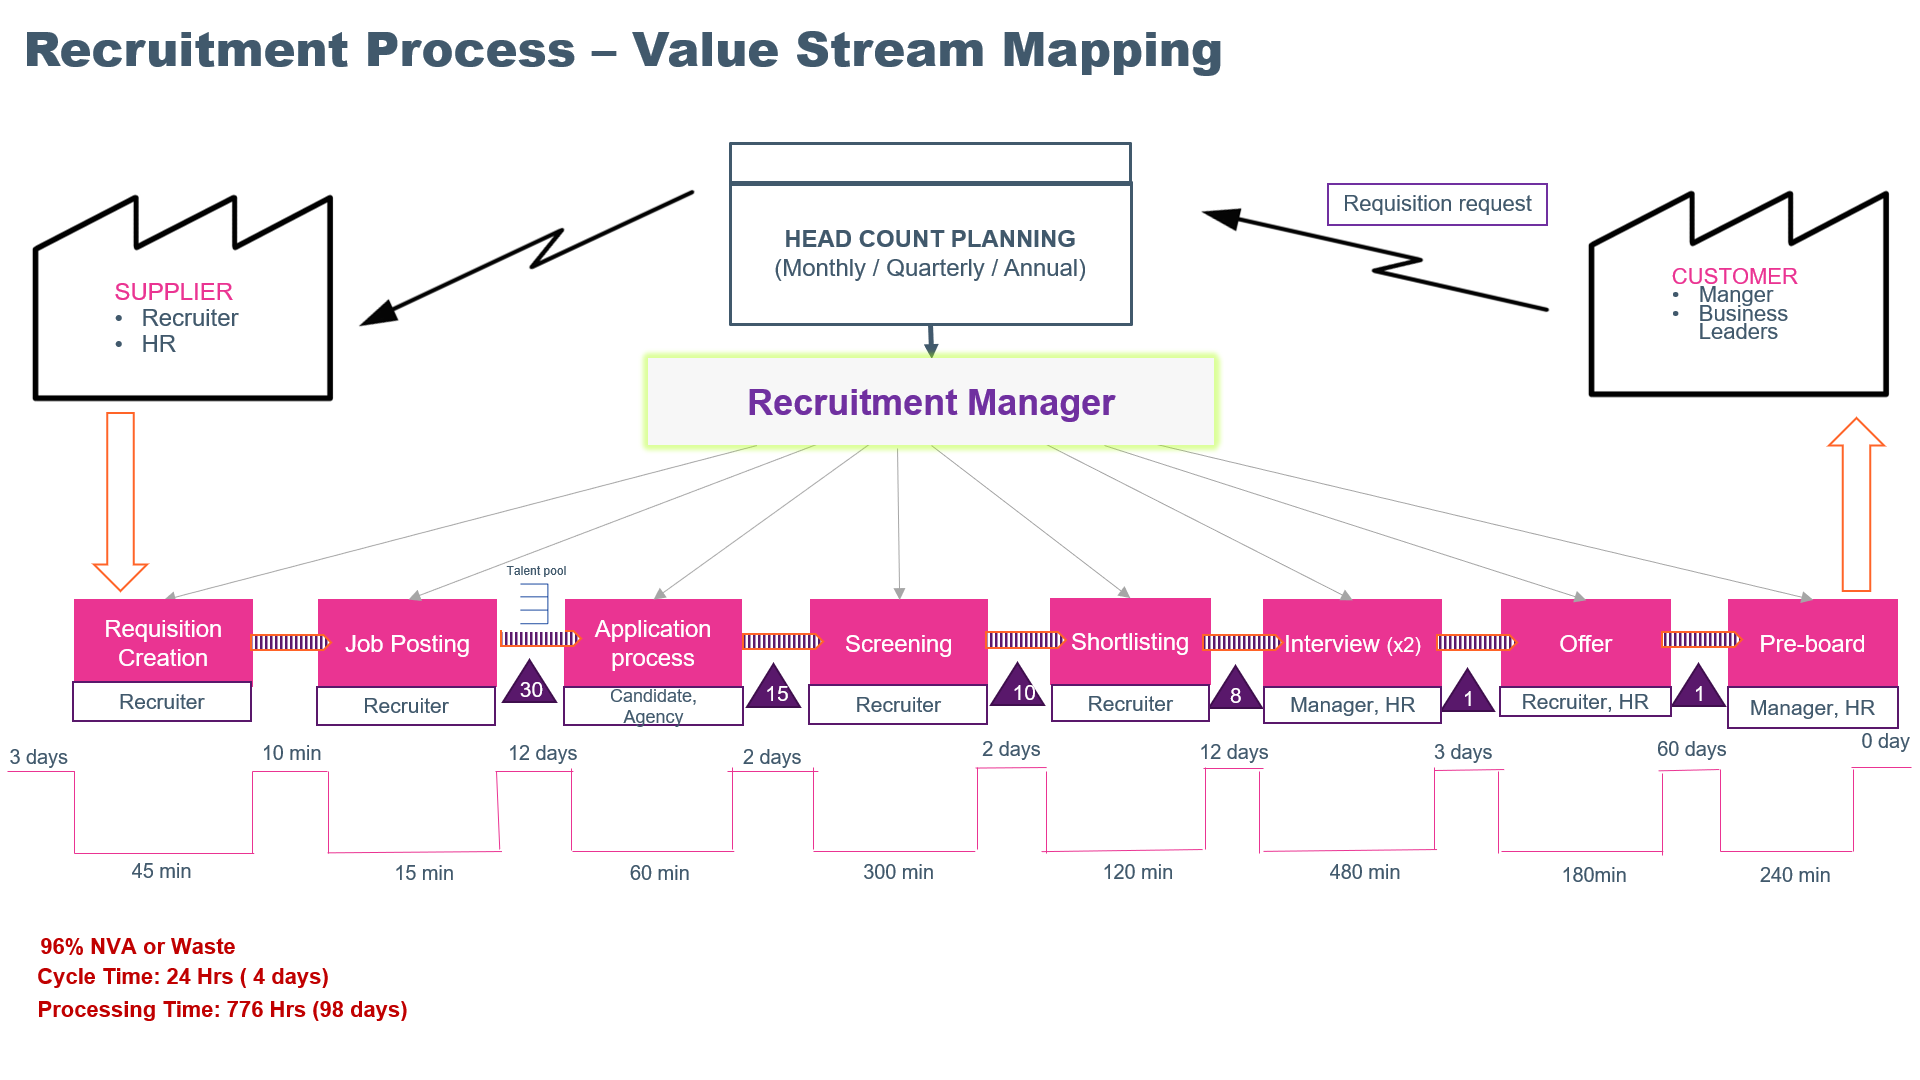 Value Stream Mapping for Recruitment Process and application of LEAN process improvement techniques